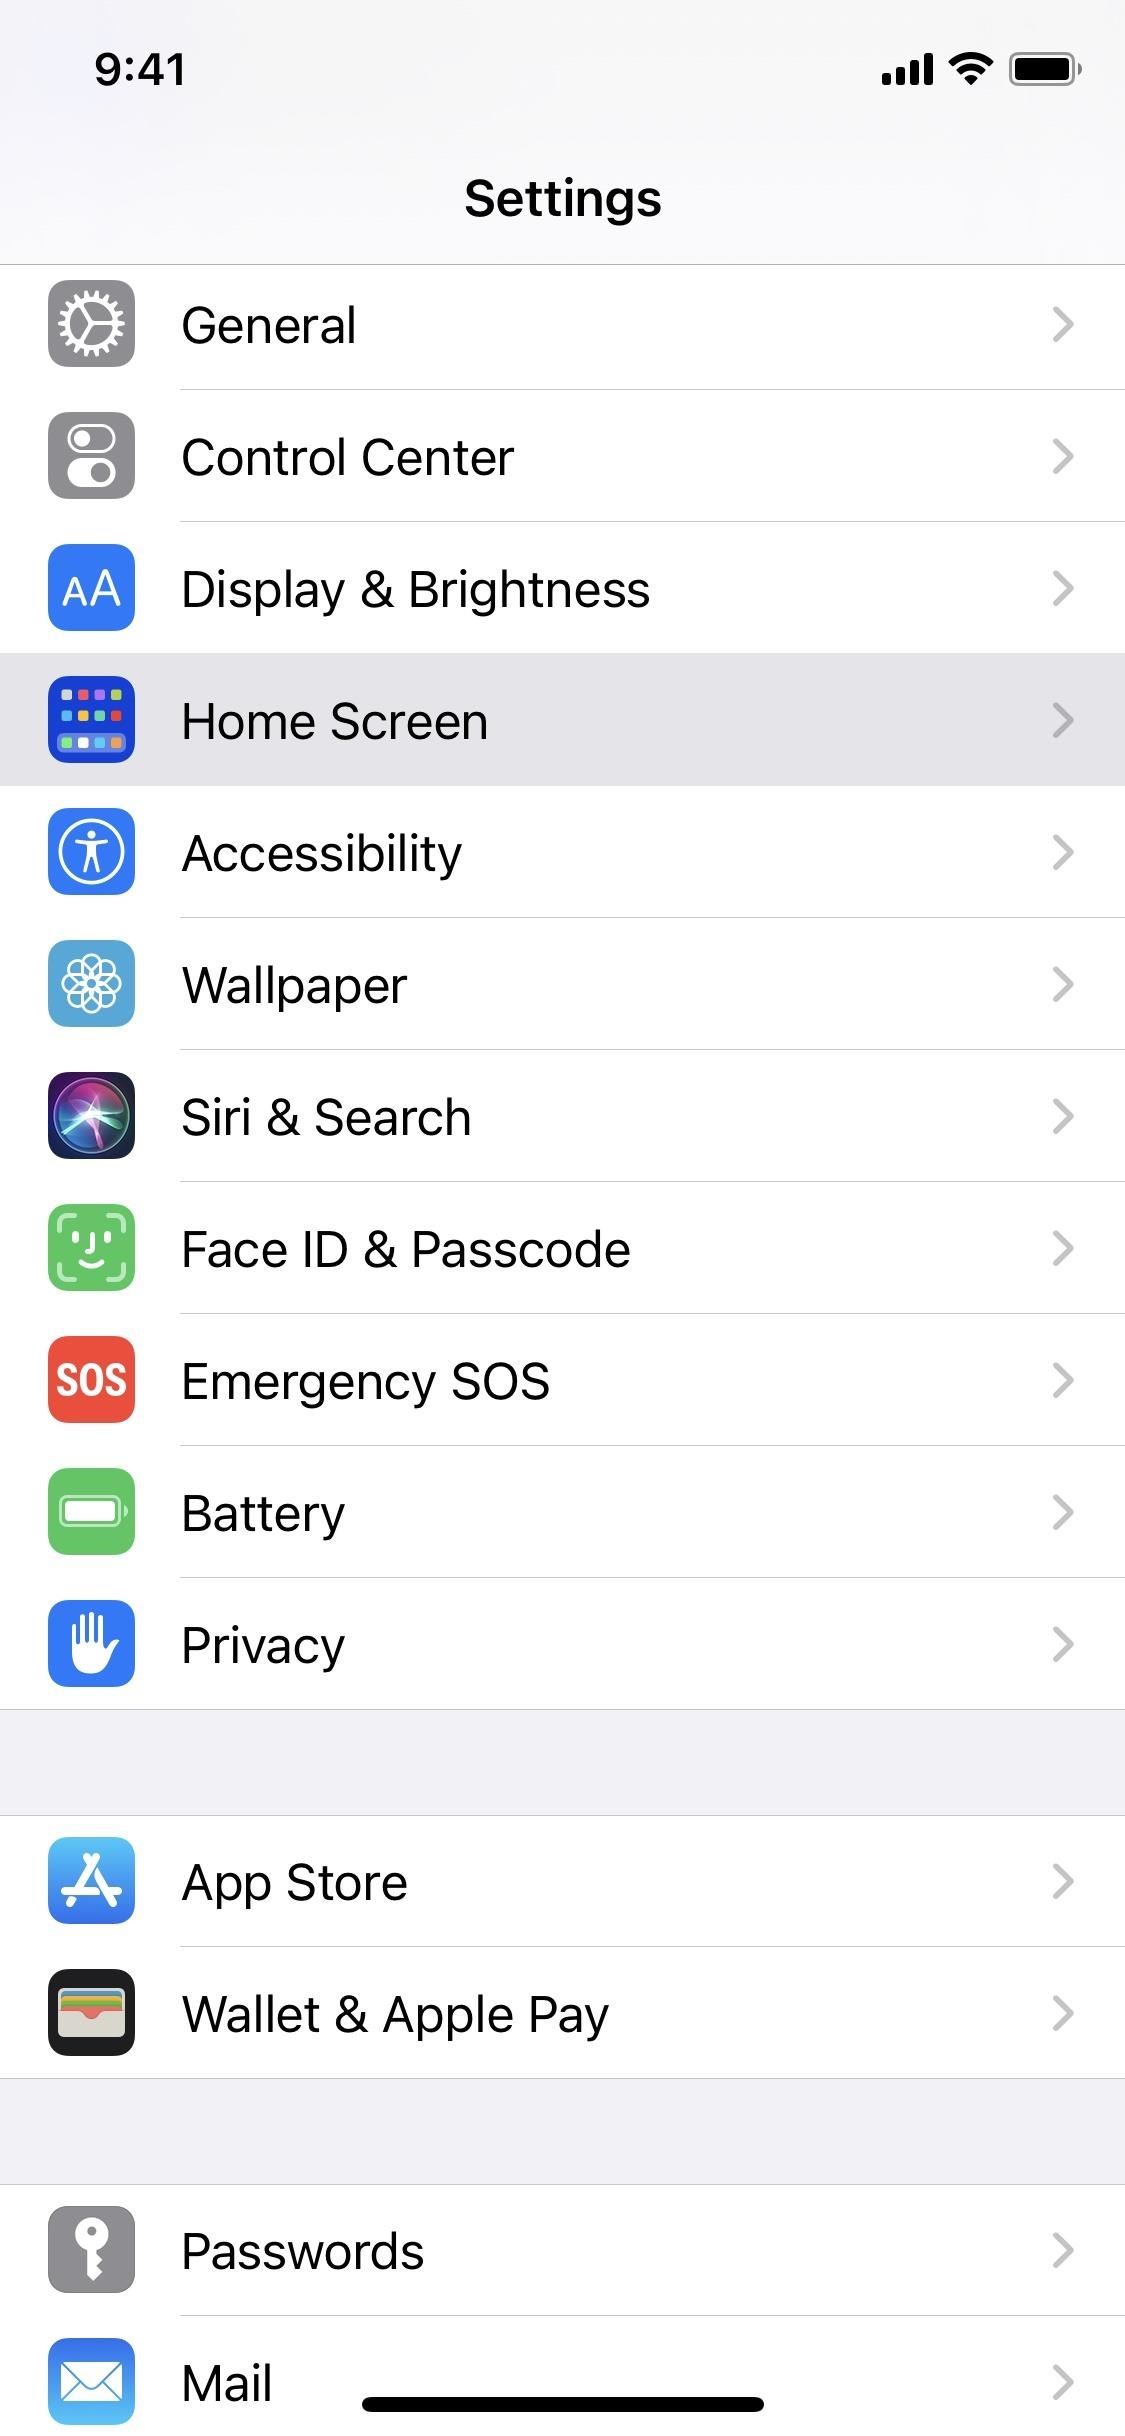 Auto-Hide New Apps You Install in iOS 14 for a Cleaner Home Screen